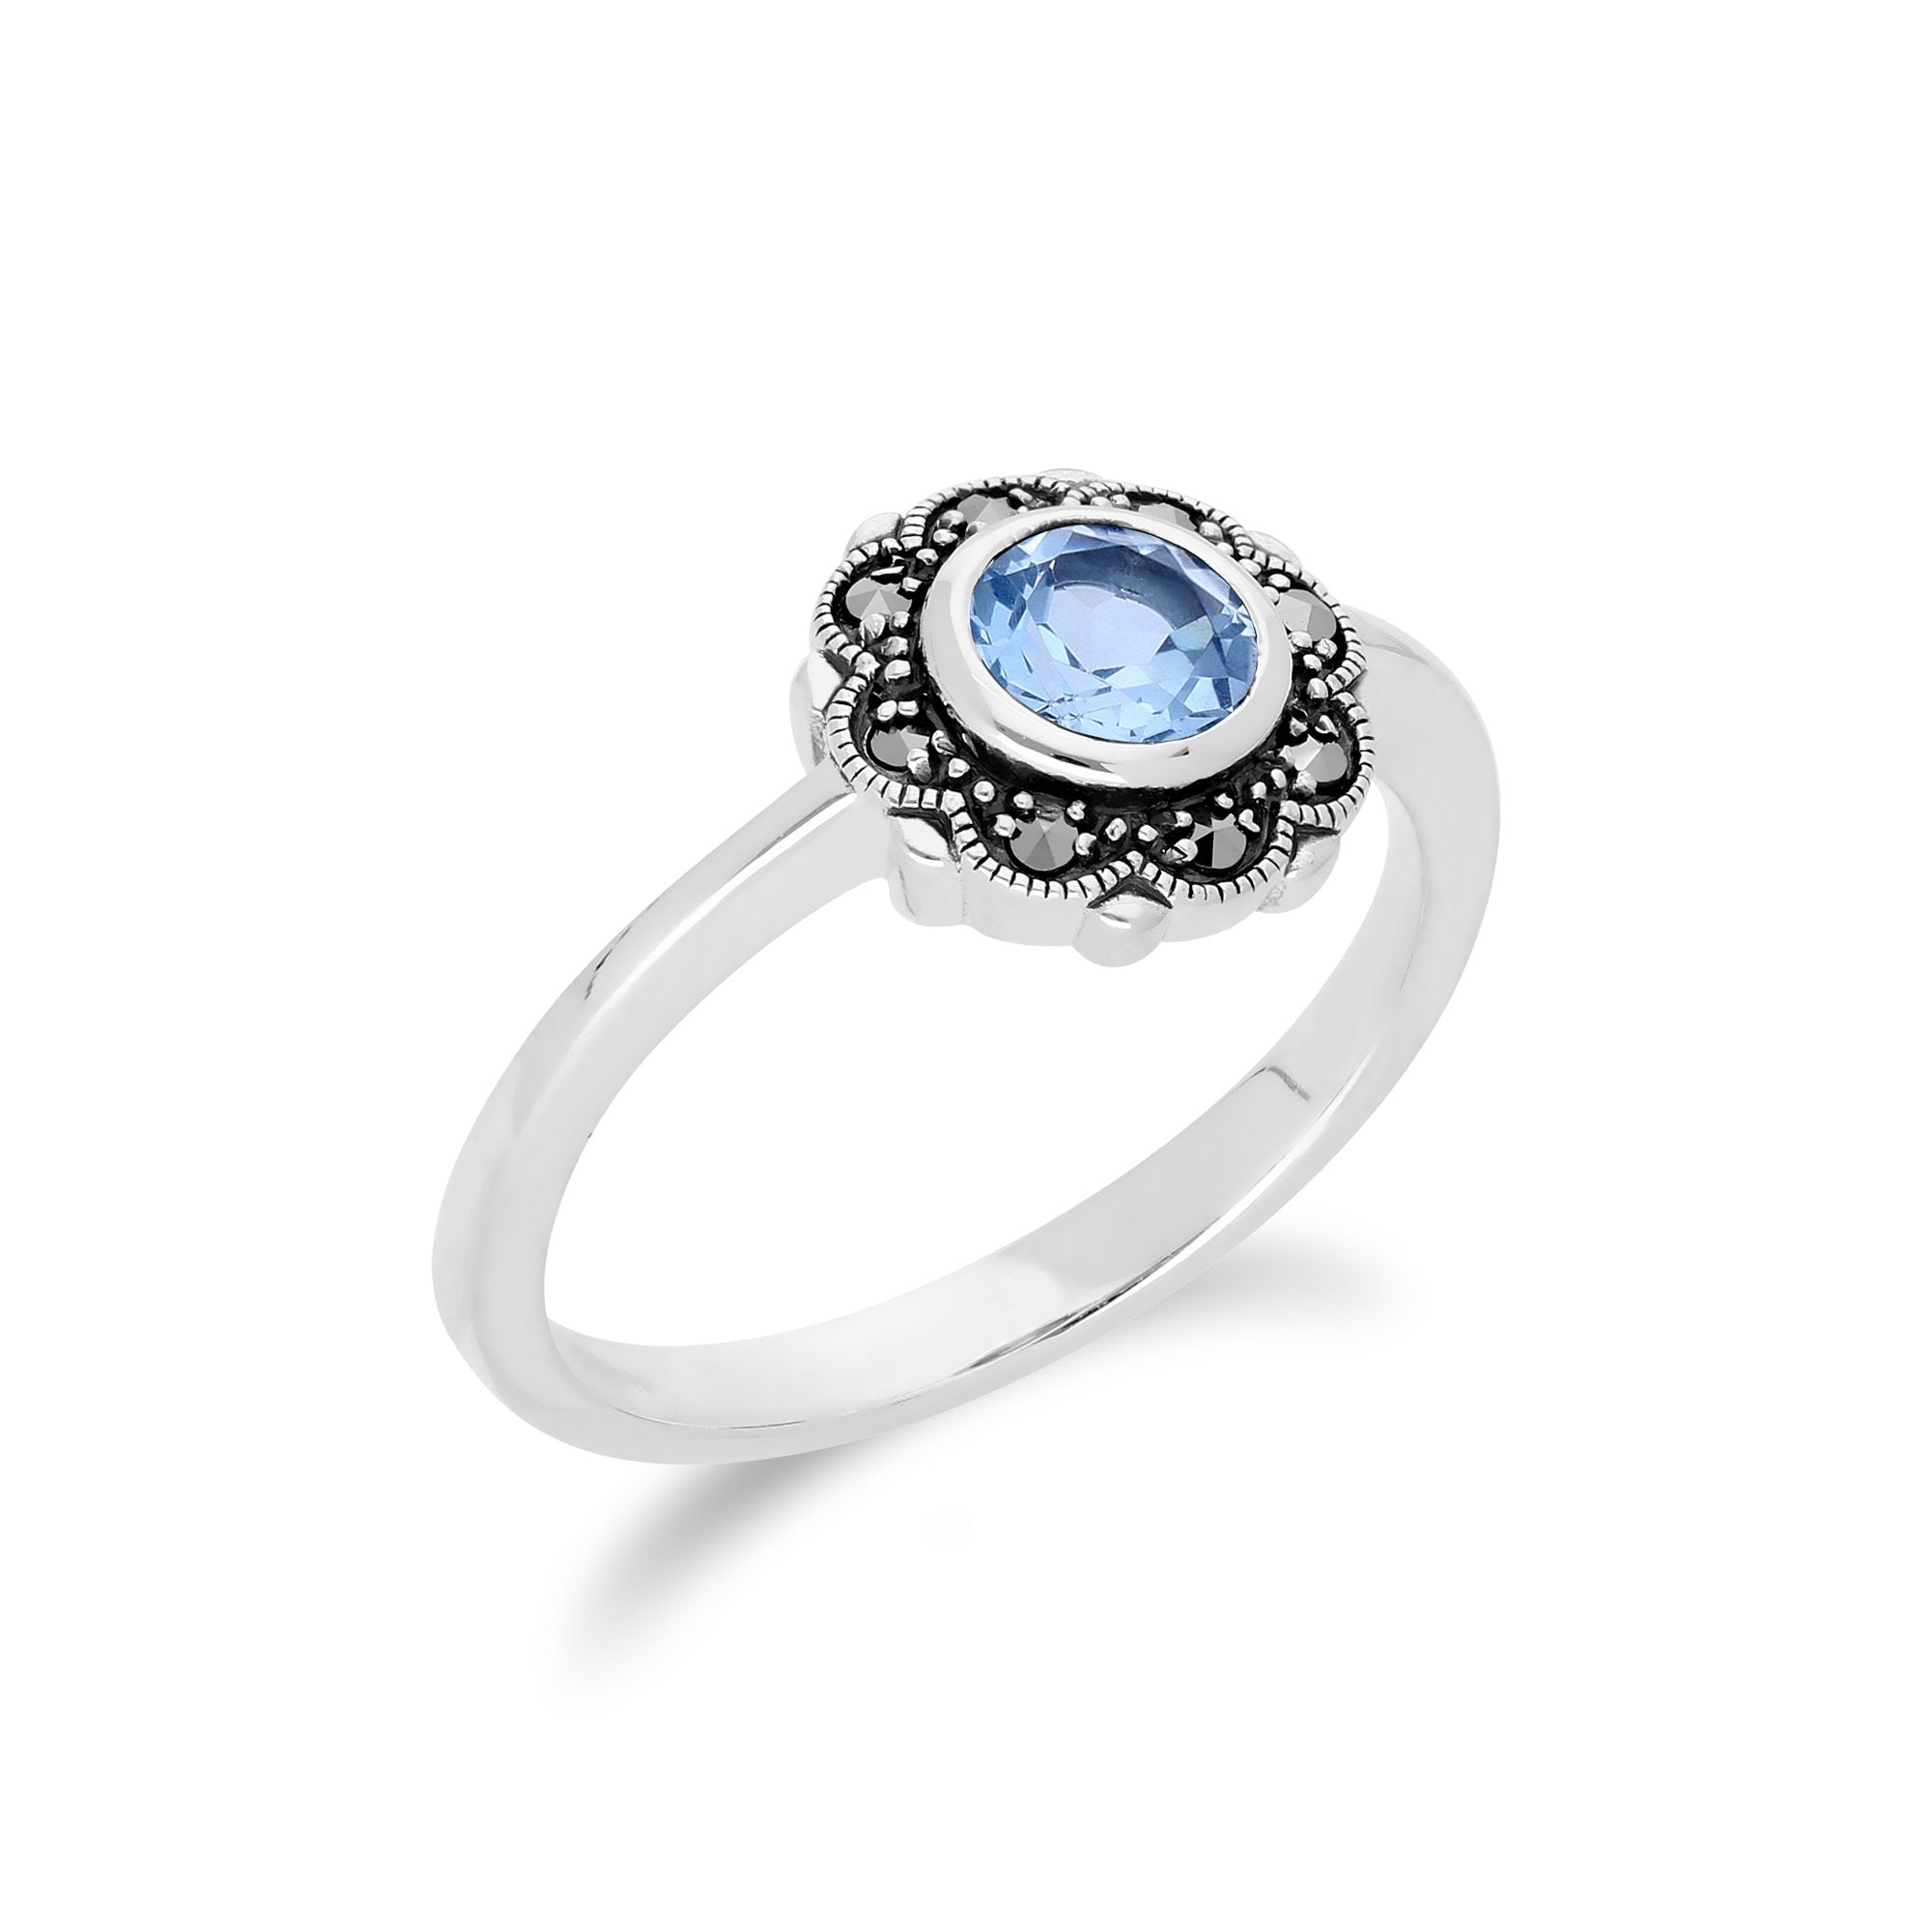 Floral Round Blue Topaz & Marcasite Halo Ring in 925 Sterling Silver